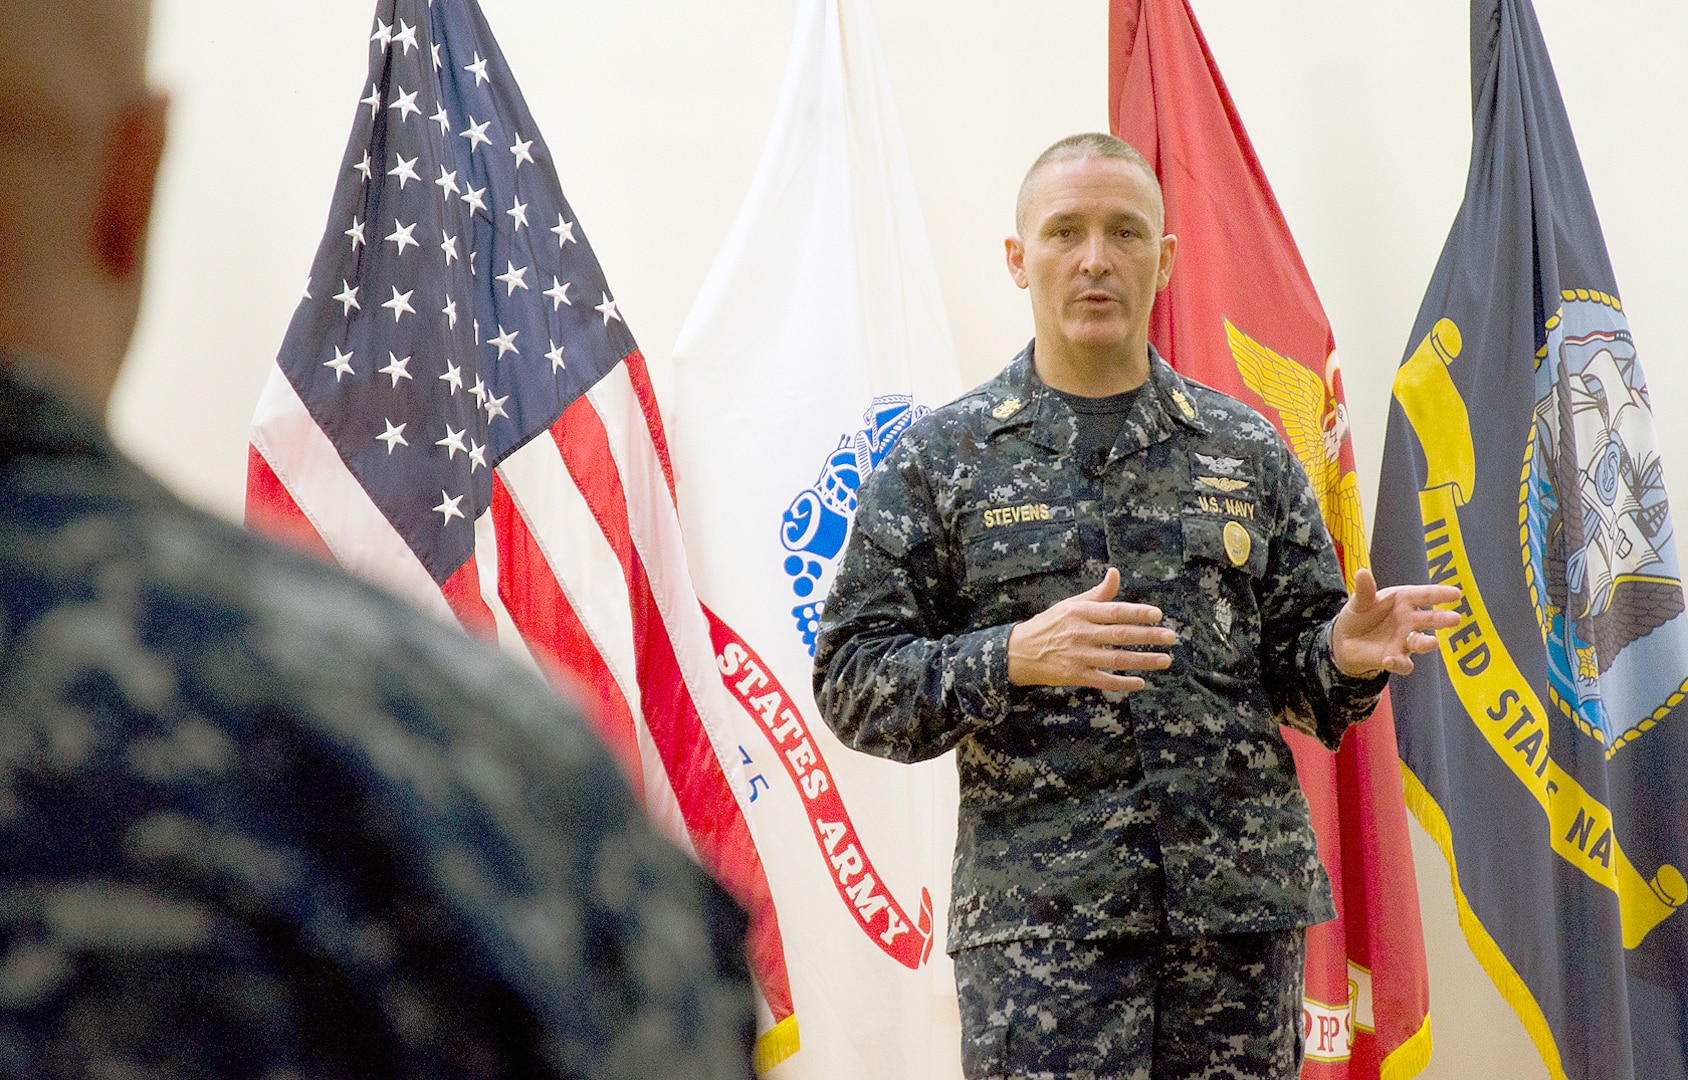 Master Chief Petty Officer of the Navy Mike Stevens answers a question from a Sailor in the audience during his all-hands call Oct. 30 at Joint Base San Antonio-Fort Sam Houston. (Photo by L.A. Shively, JBSA-Fort Sam Houston Public Affairs)